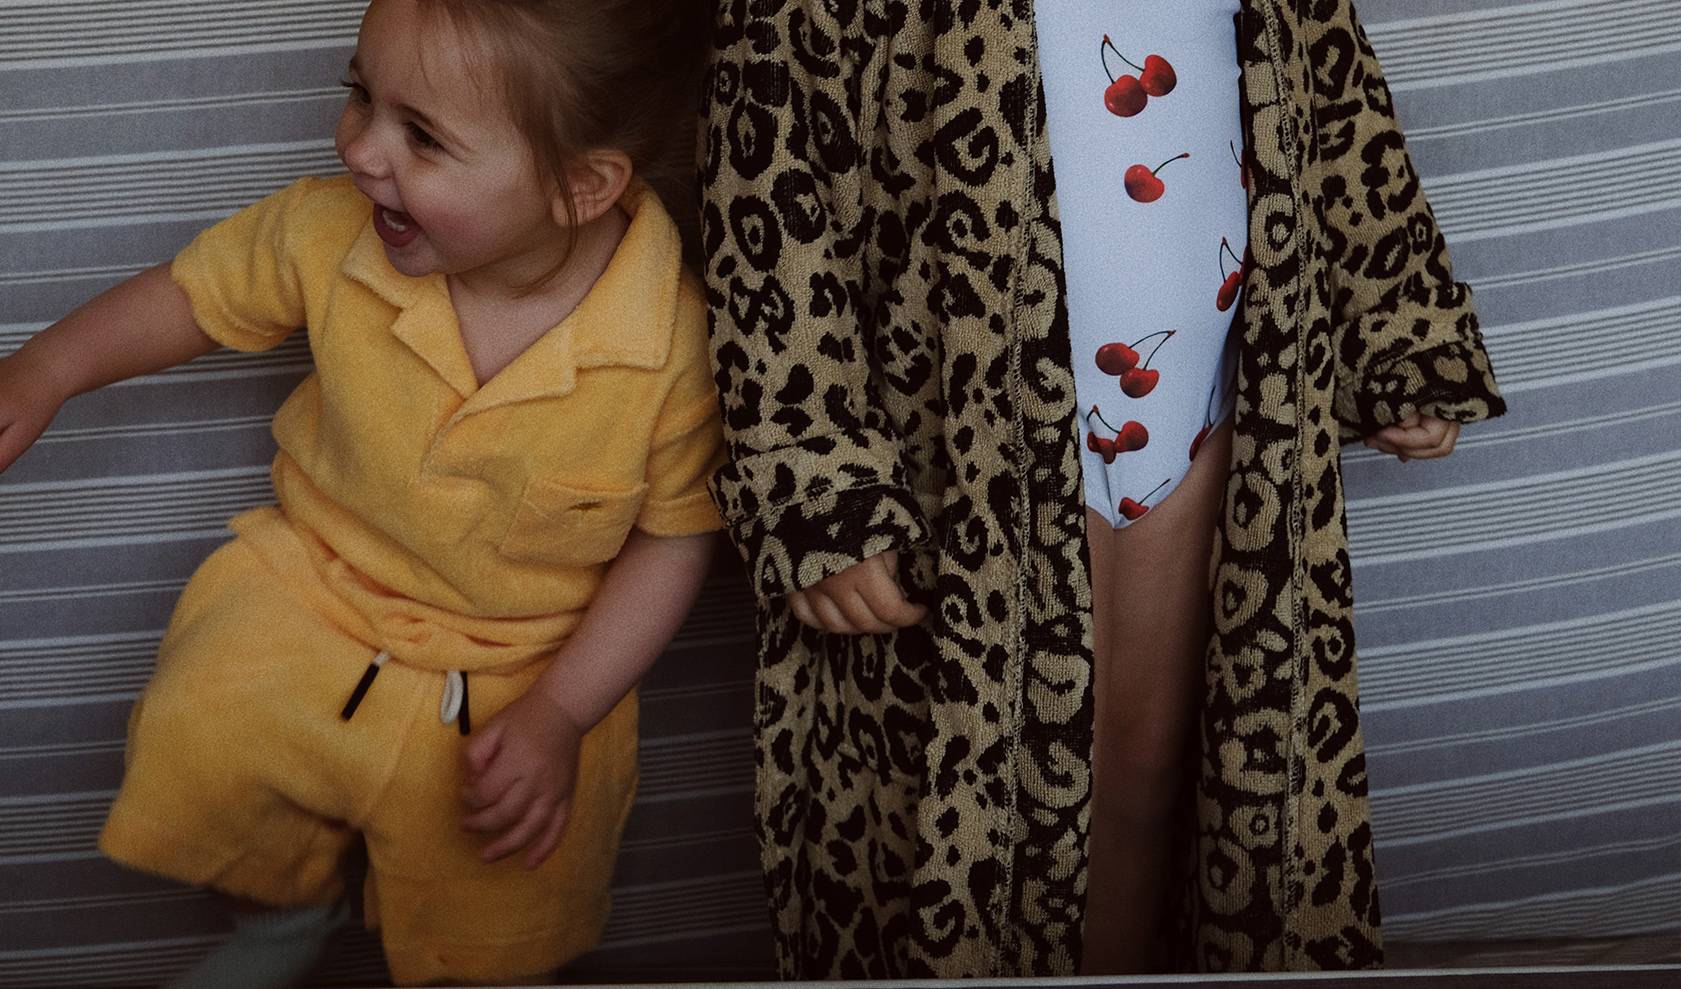 There are two kids, the one on the left is wearing a bright yellow Terry set, shorts and a shortsleeved shirt. The kid on the right is wearing a cherry printed bathing suit and a leopard printed robe on top. 